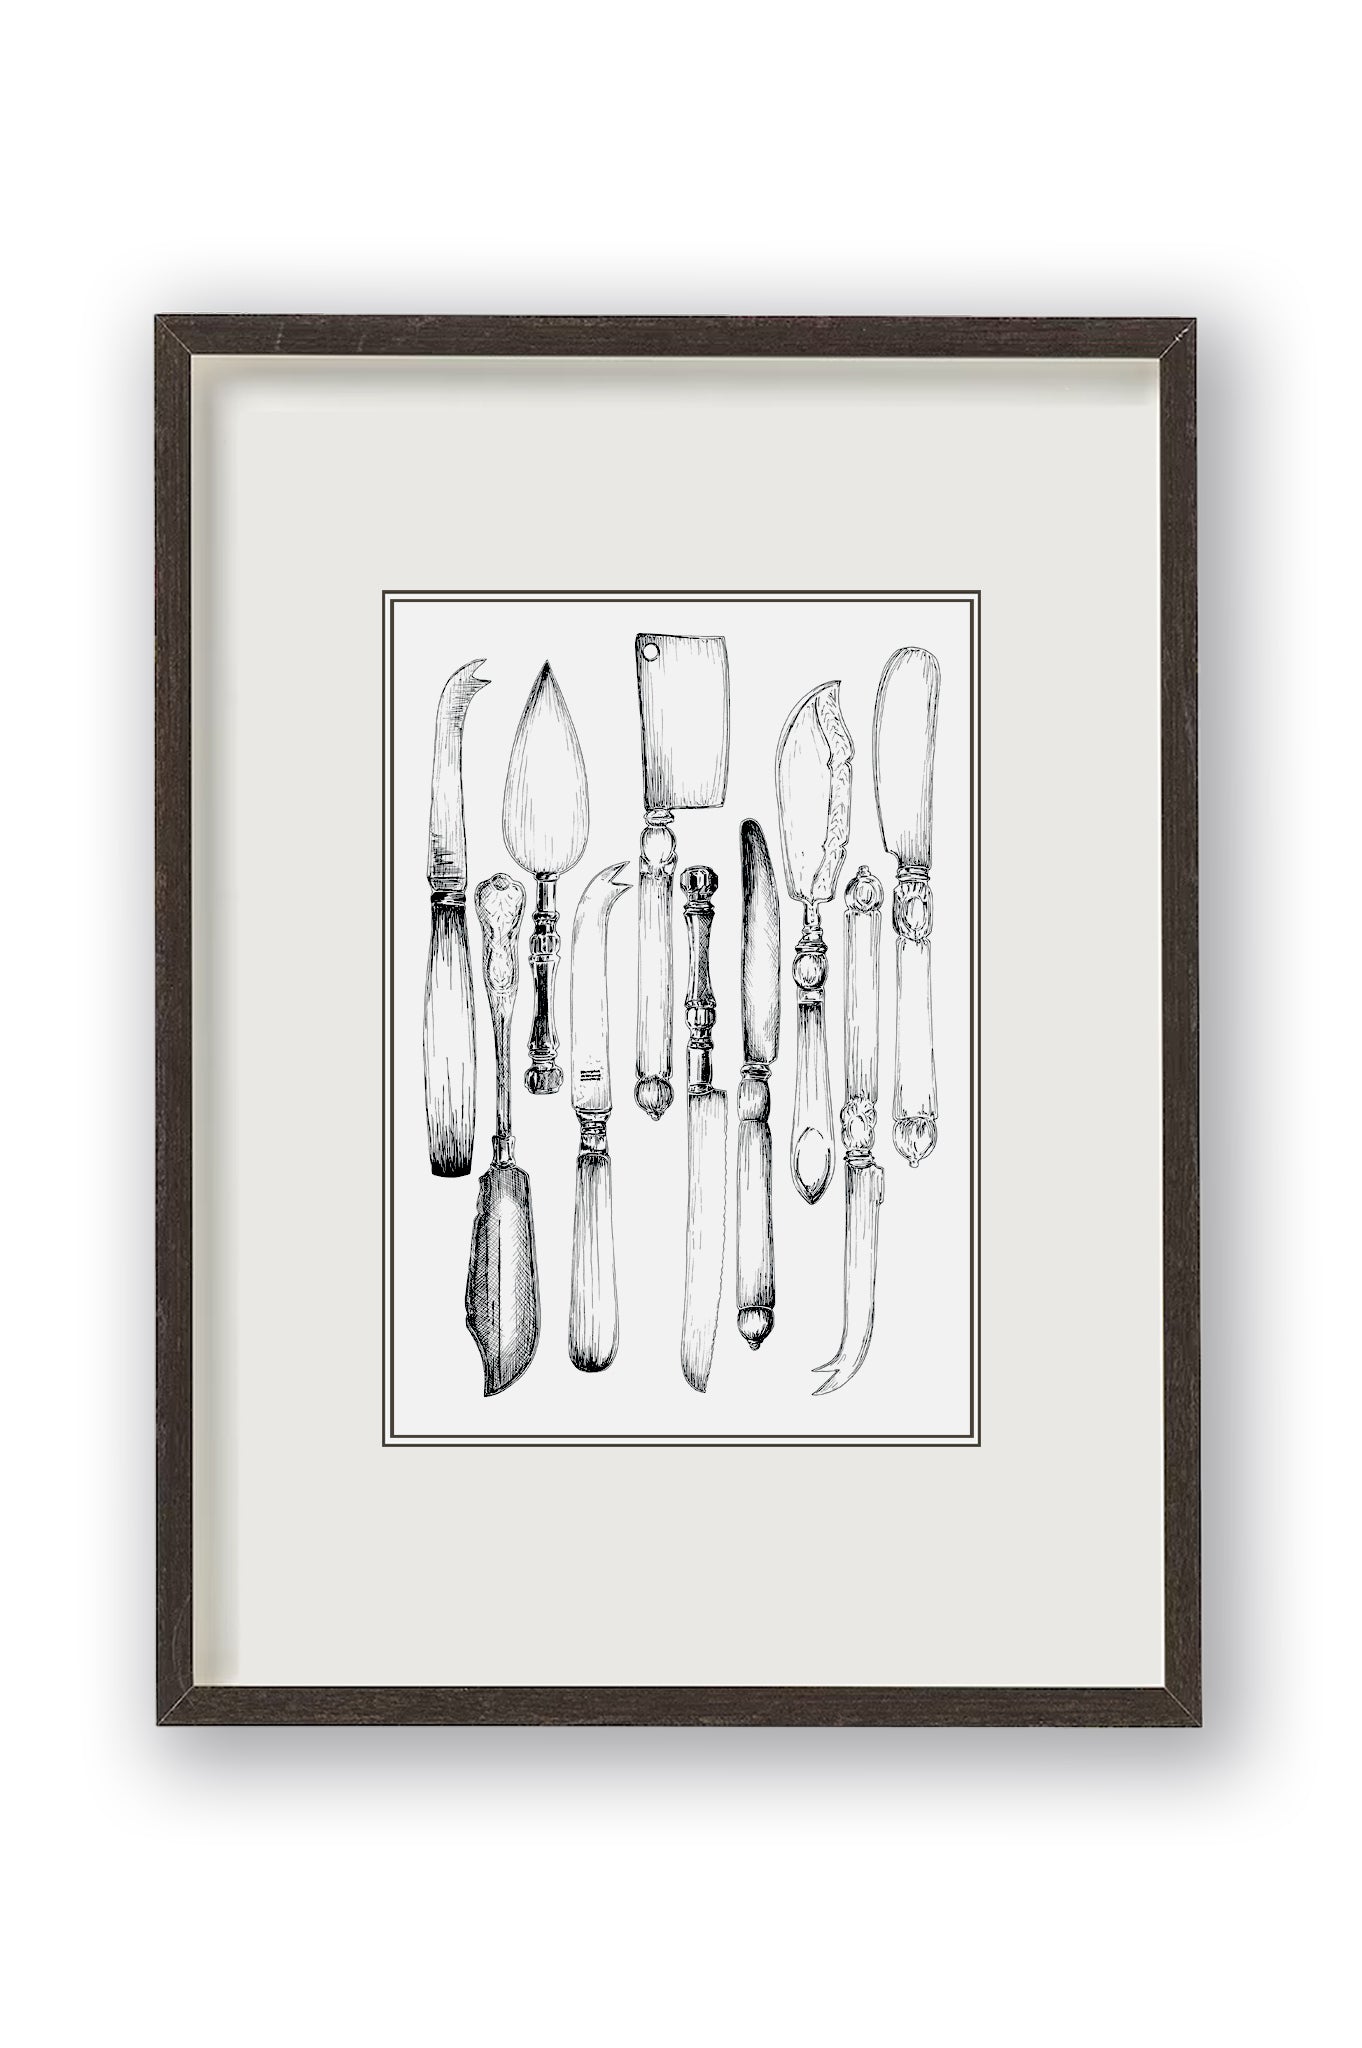 Vintage knife monochrome illustration pictured double mounted in a black frame